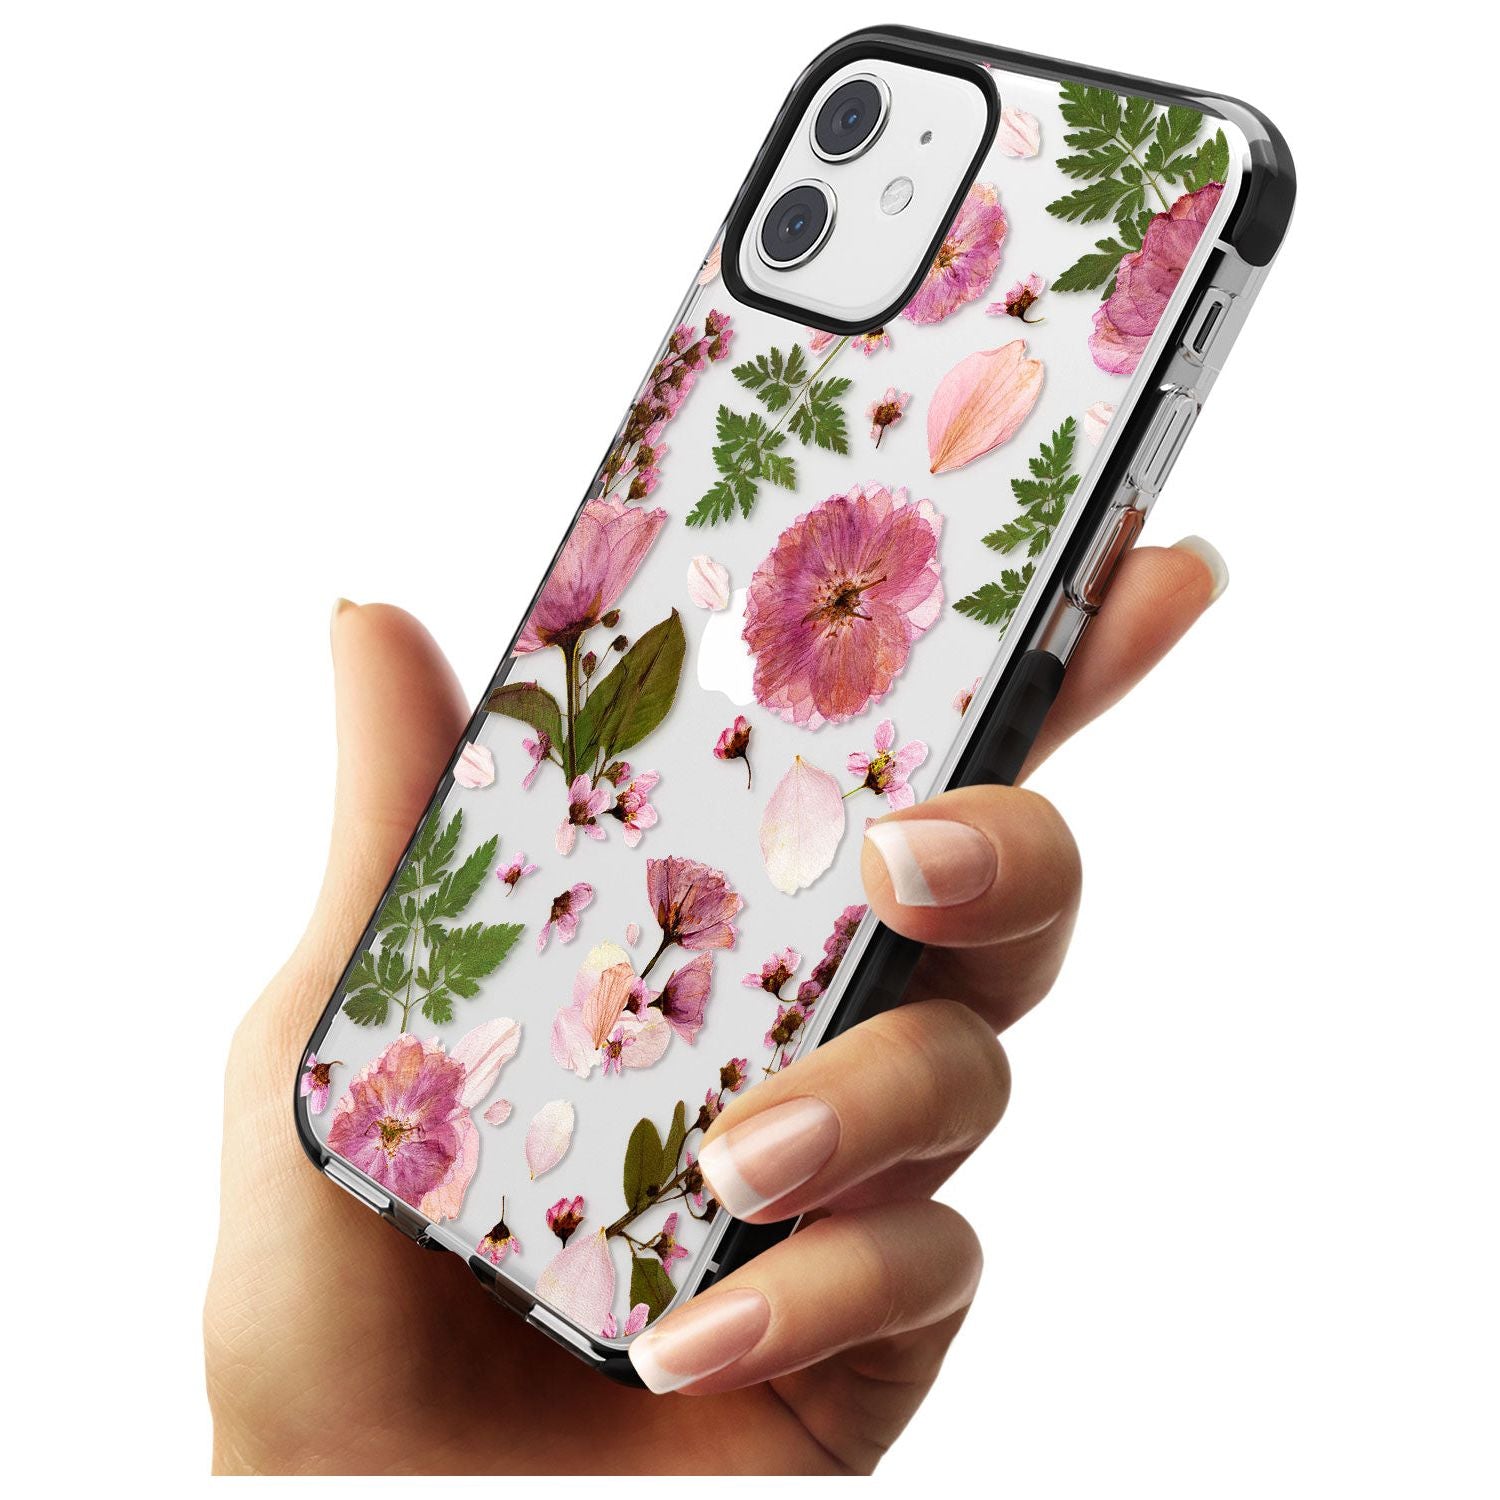 Natural Arrangement of Flowers & Leaves Design Black Impact Phone Case for iPhone 11